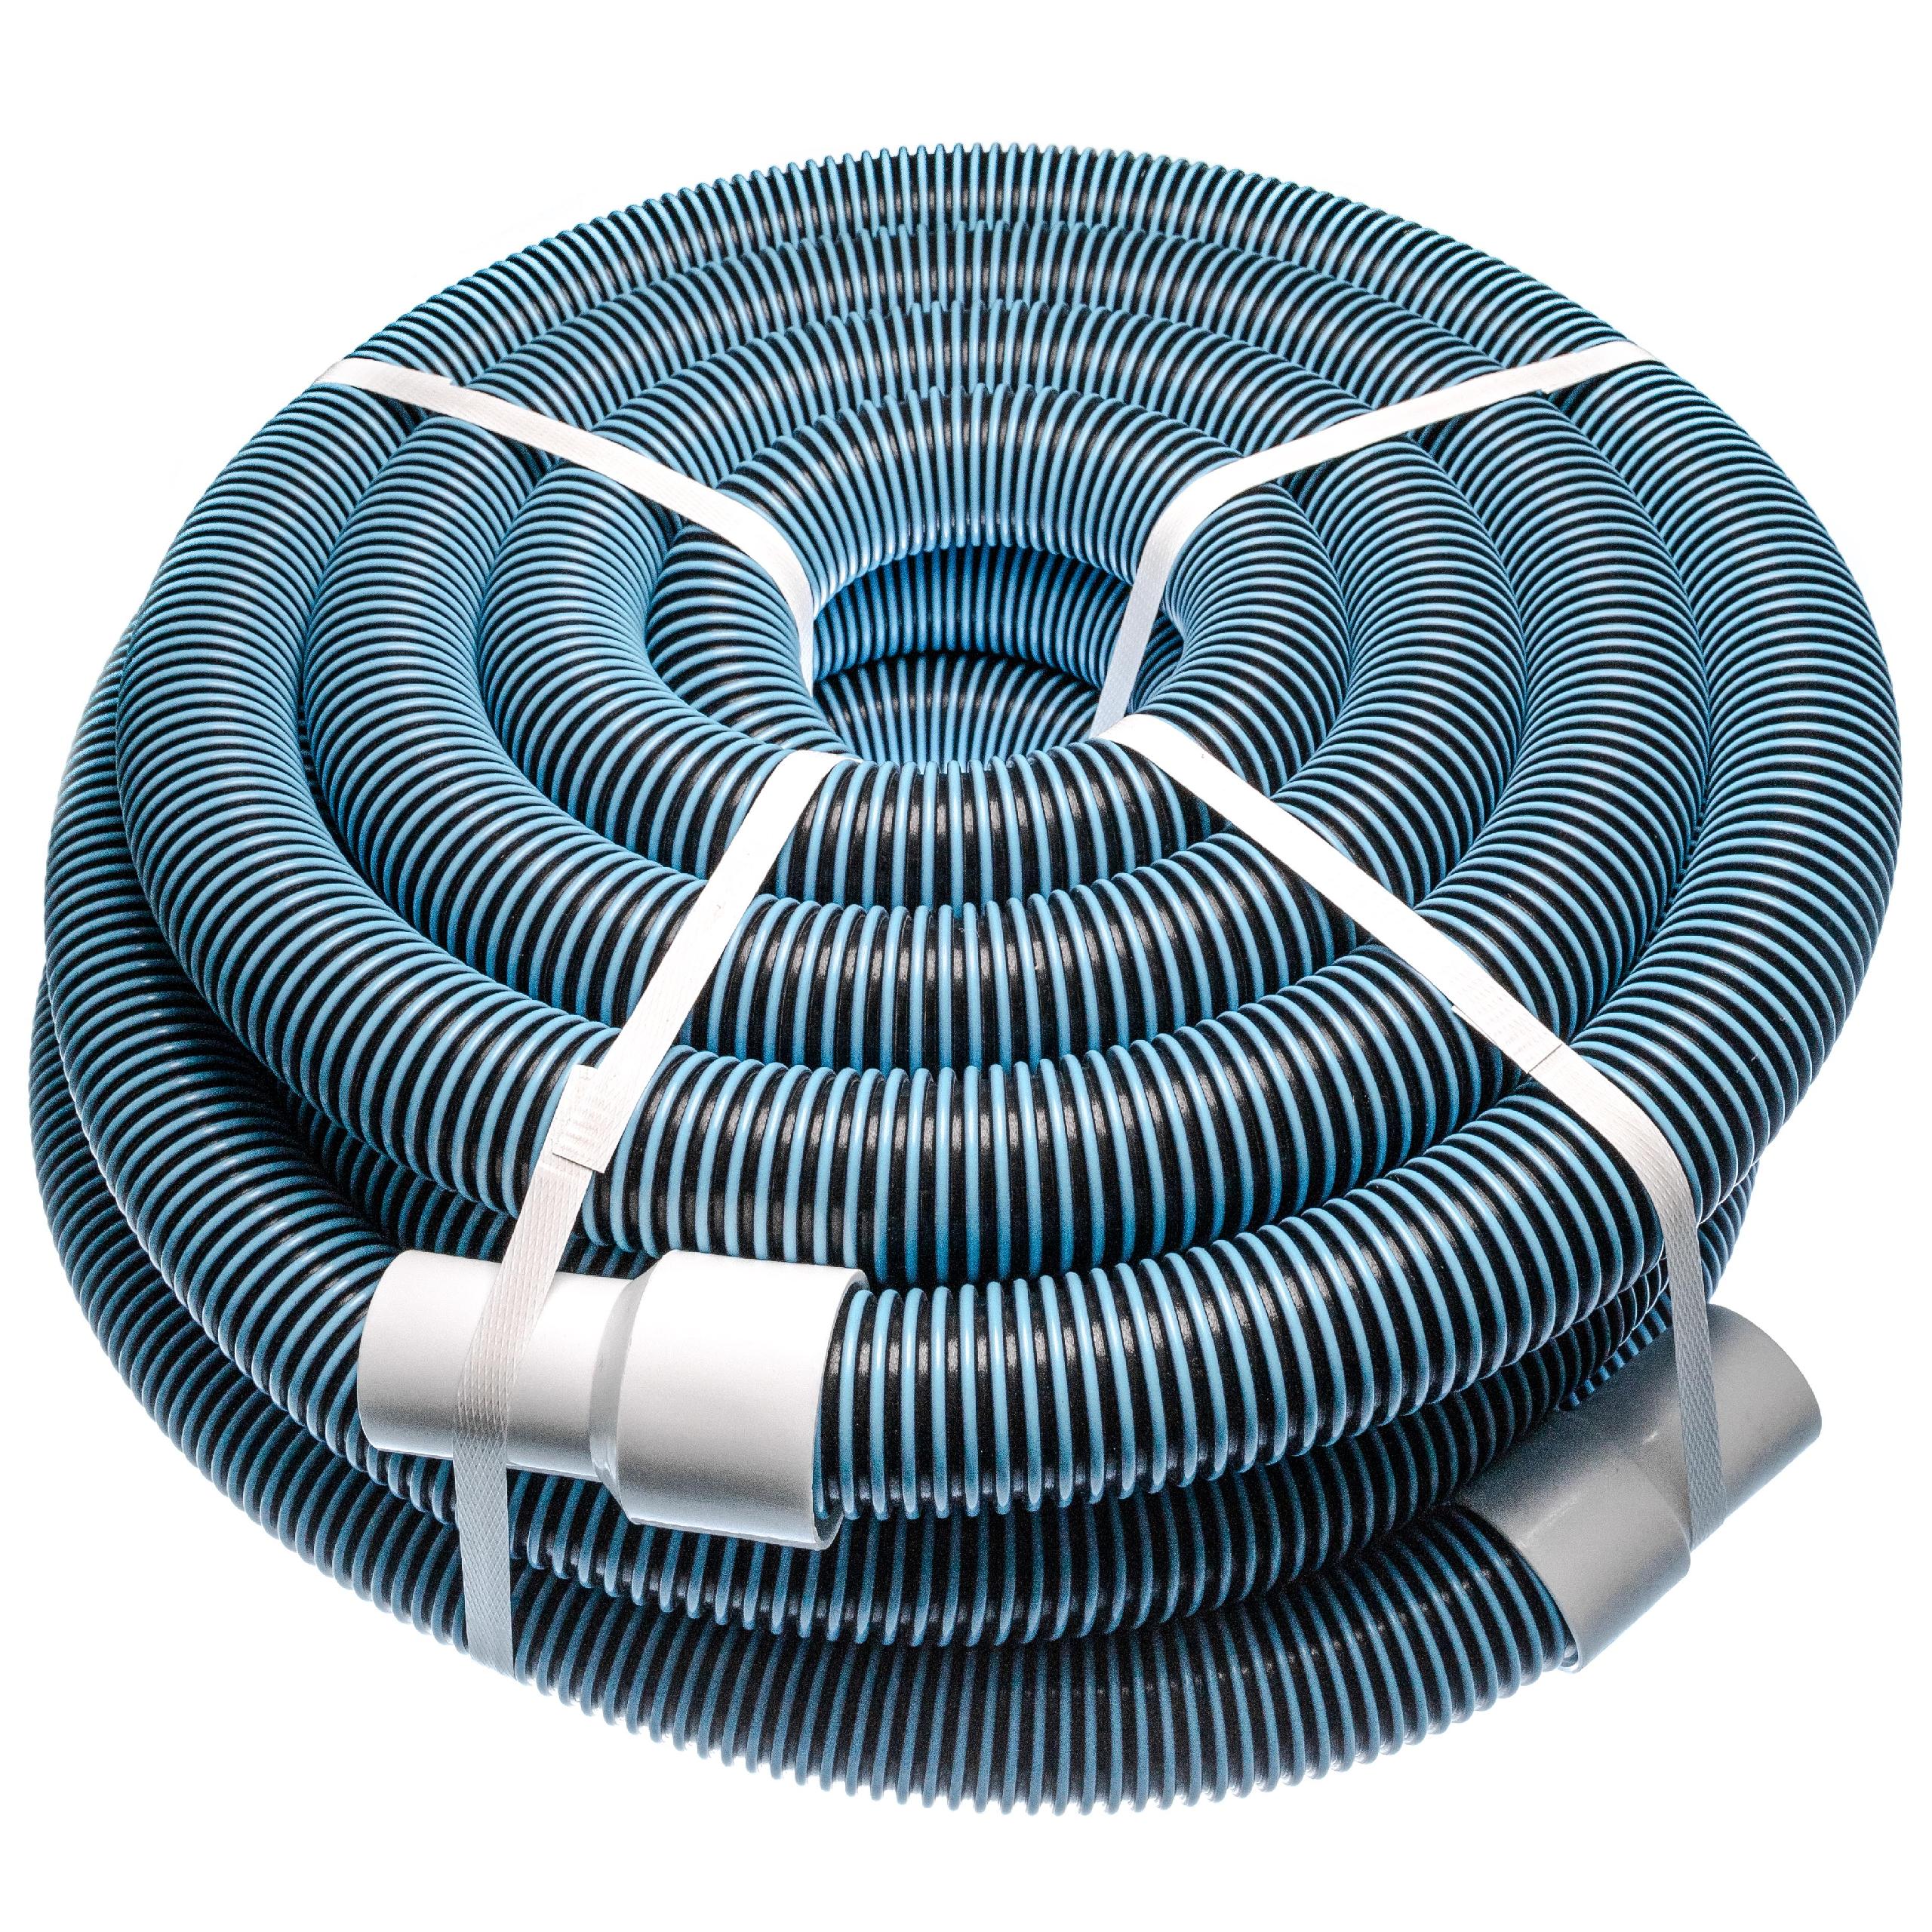 Hose Pipe suitable for Skimmer, Filter, Pool Cleaner Robot - connector 38 mm, 15 m